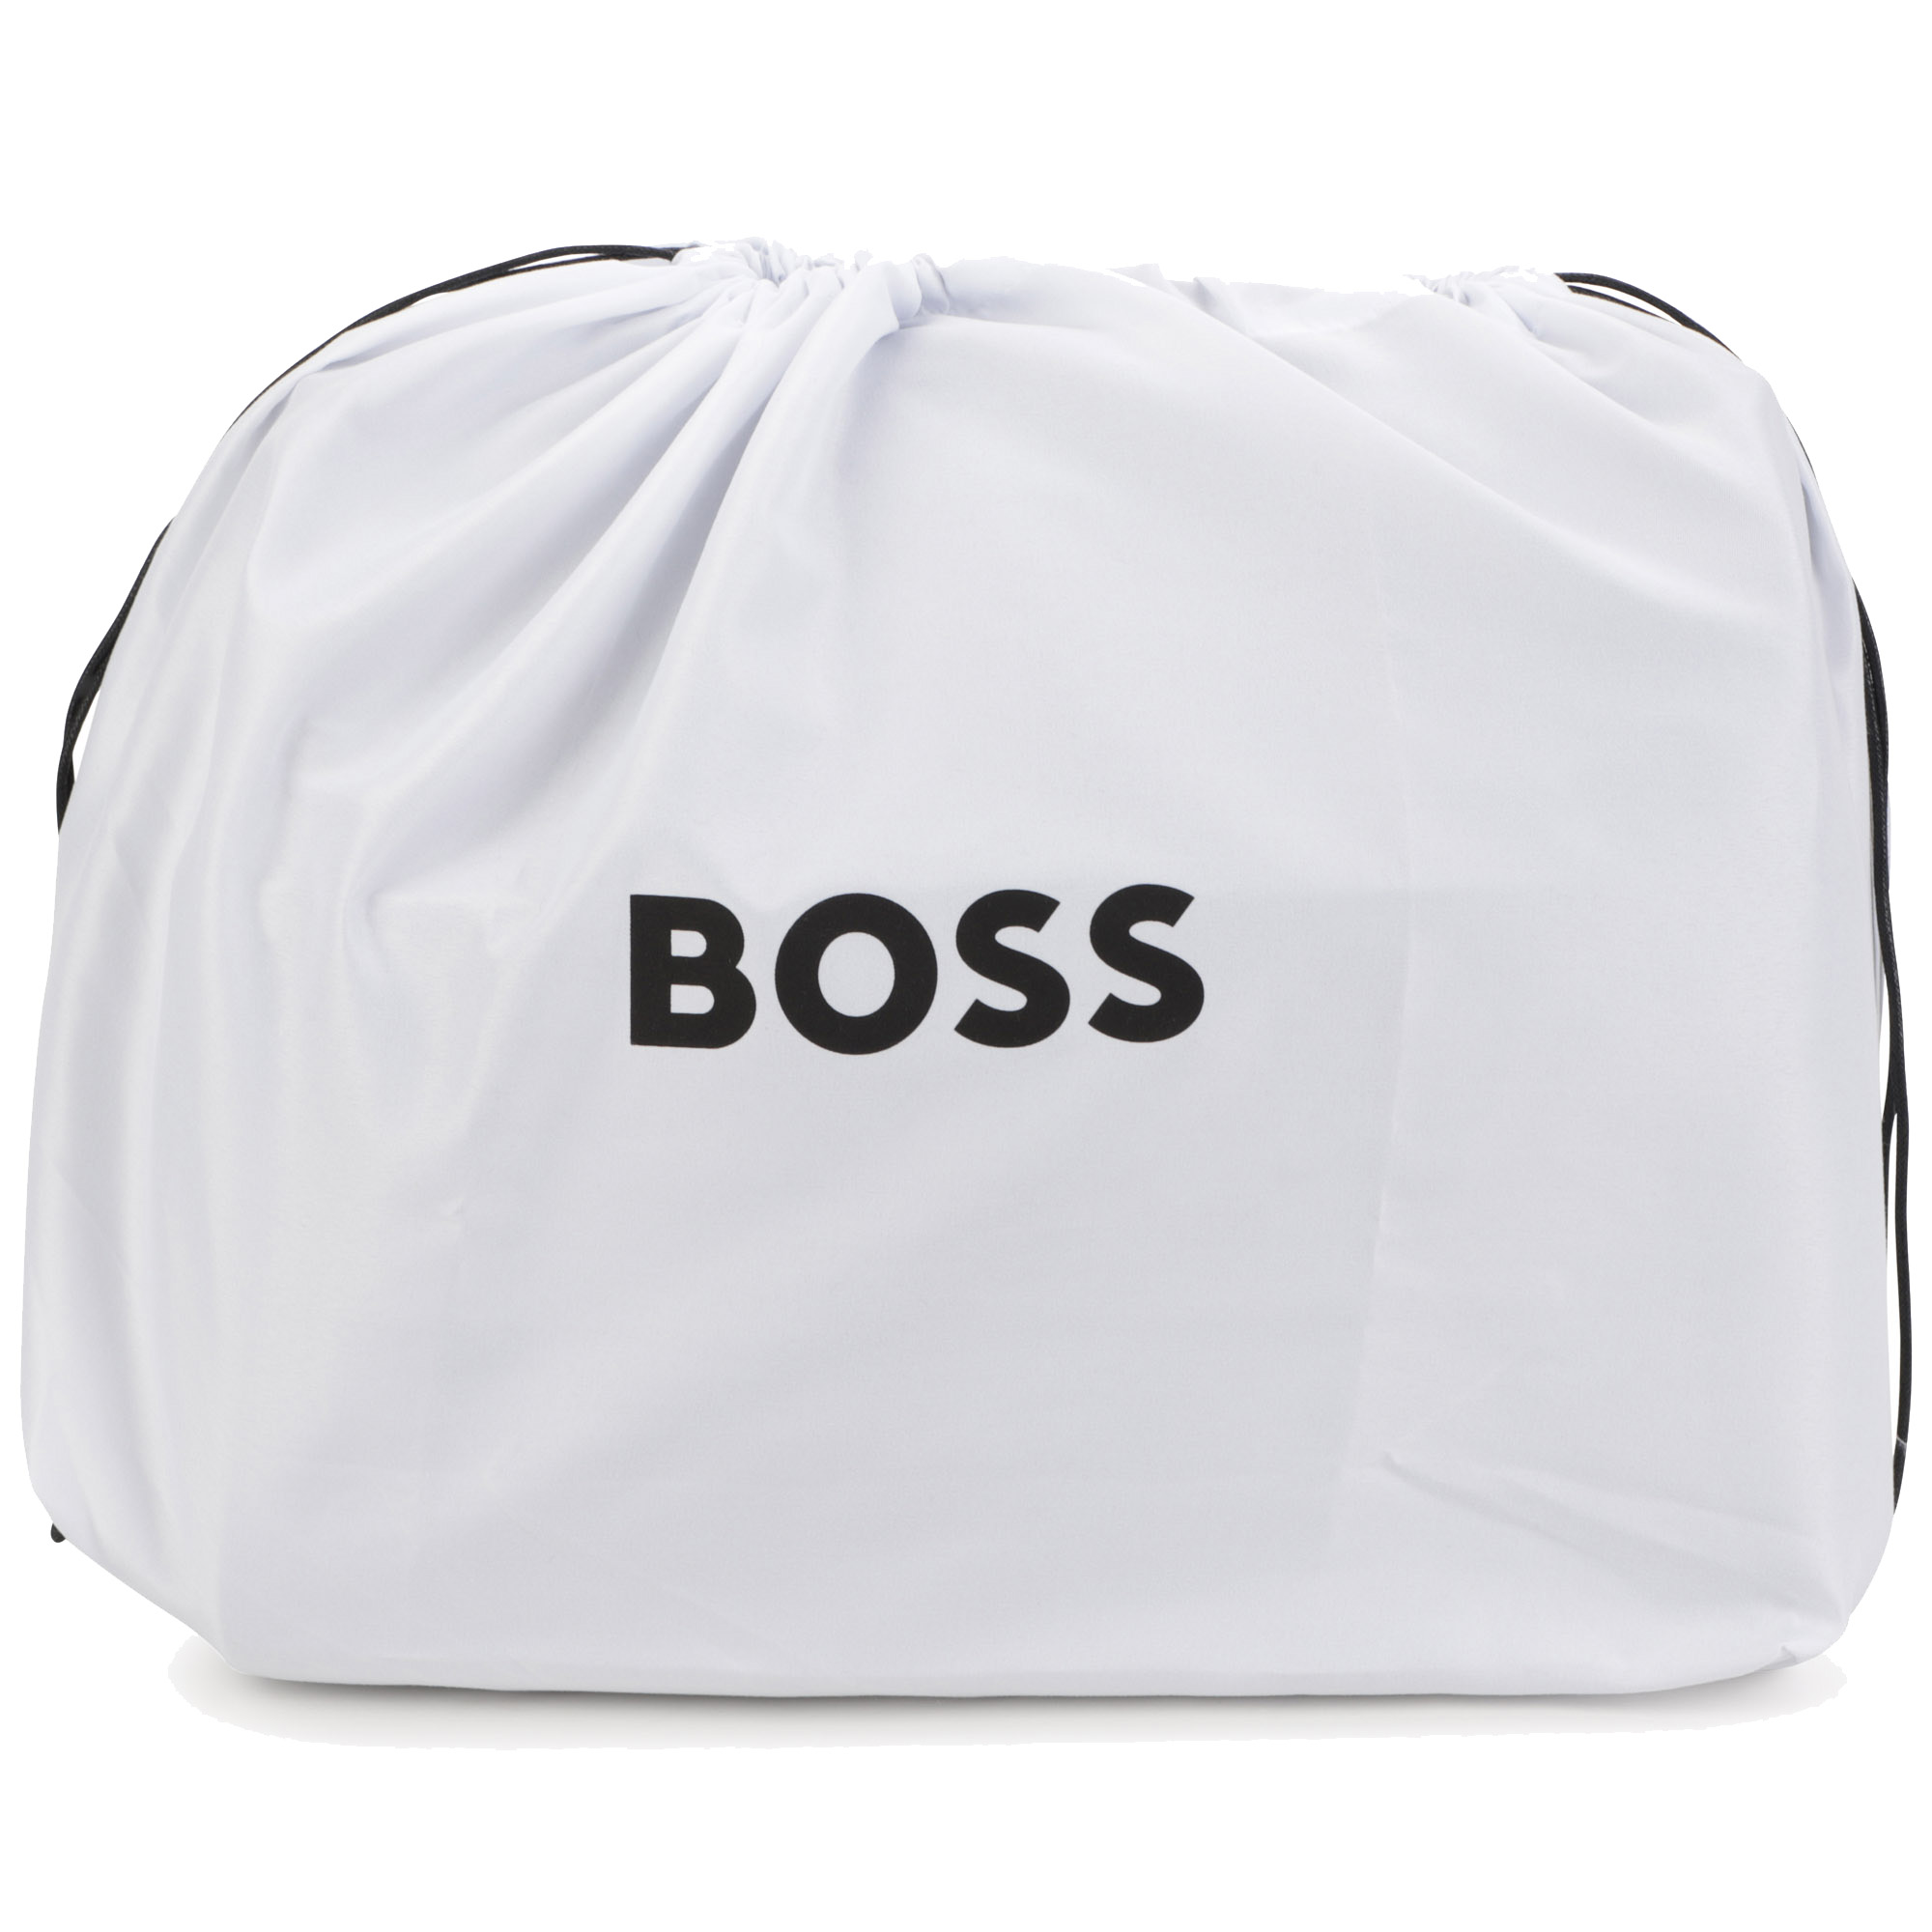 Fabric changing bag BOSS for UNISEX